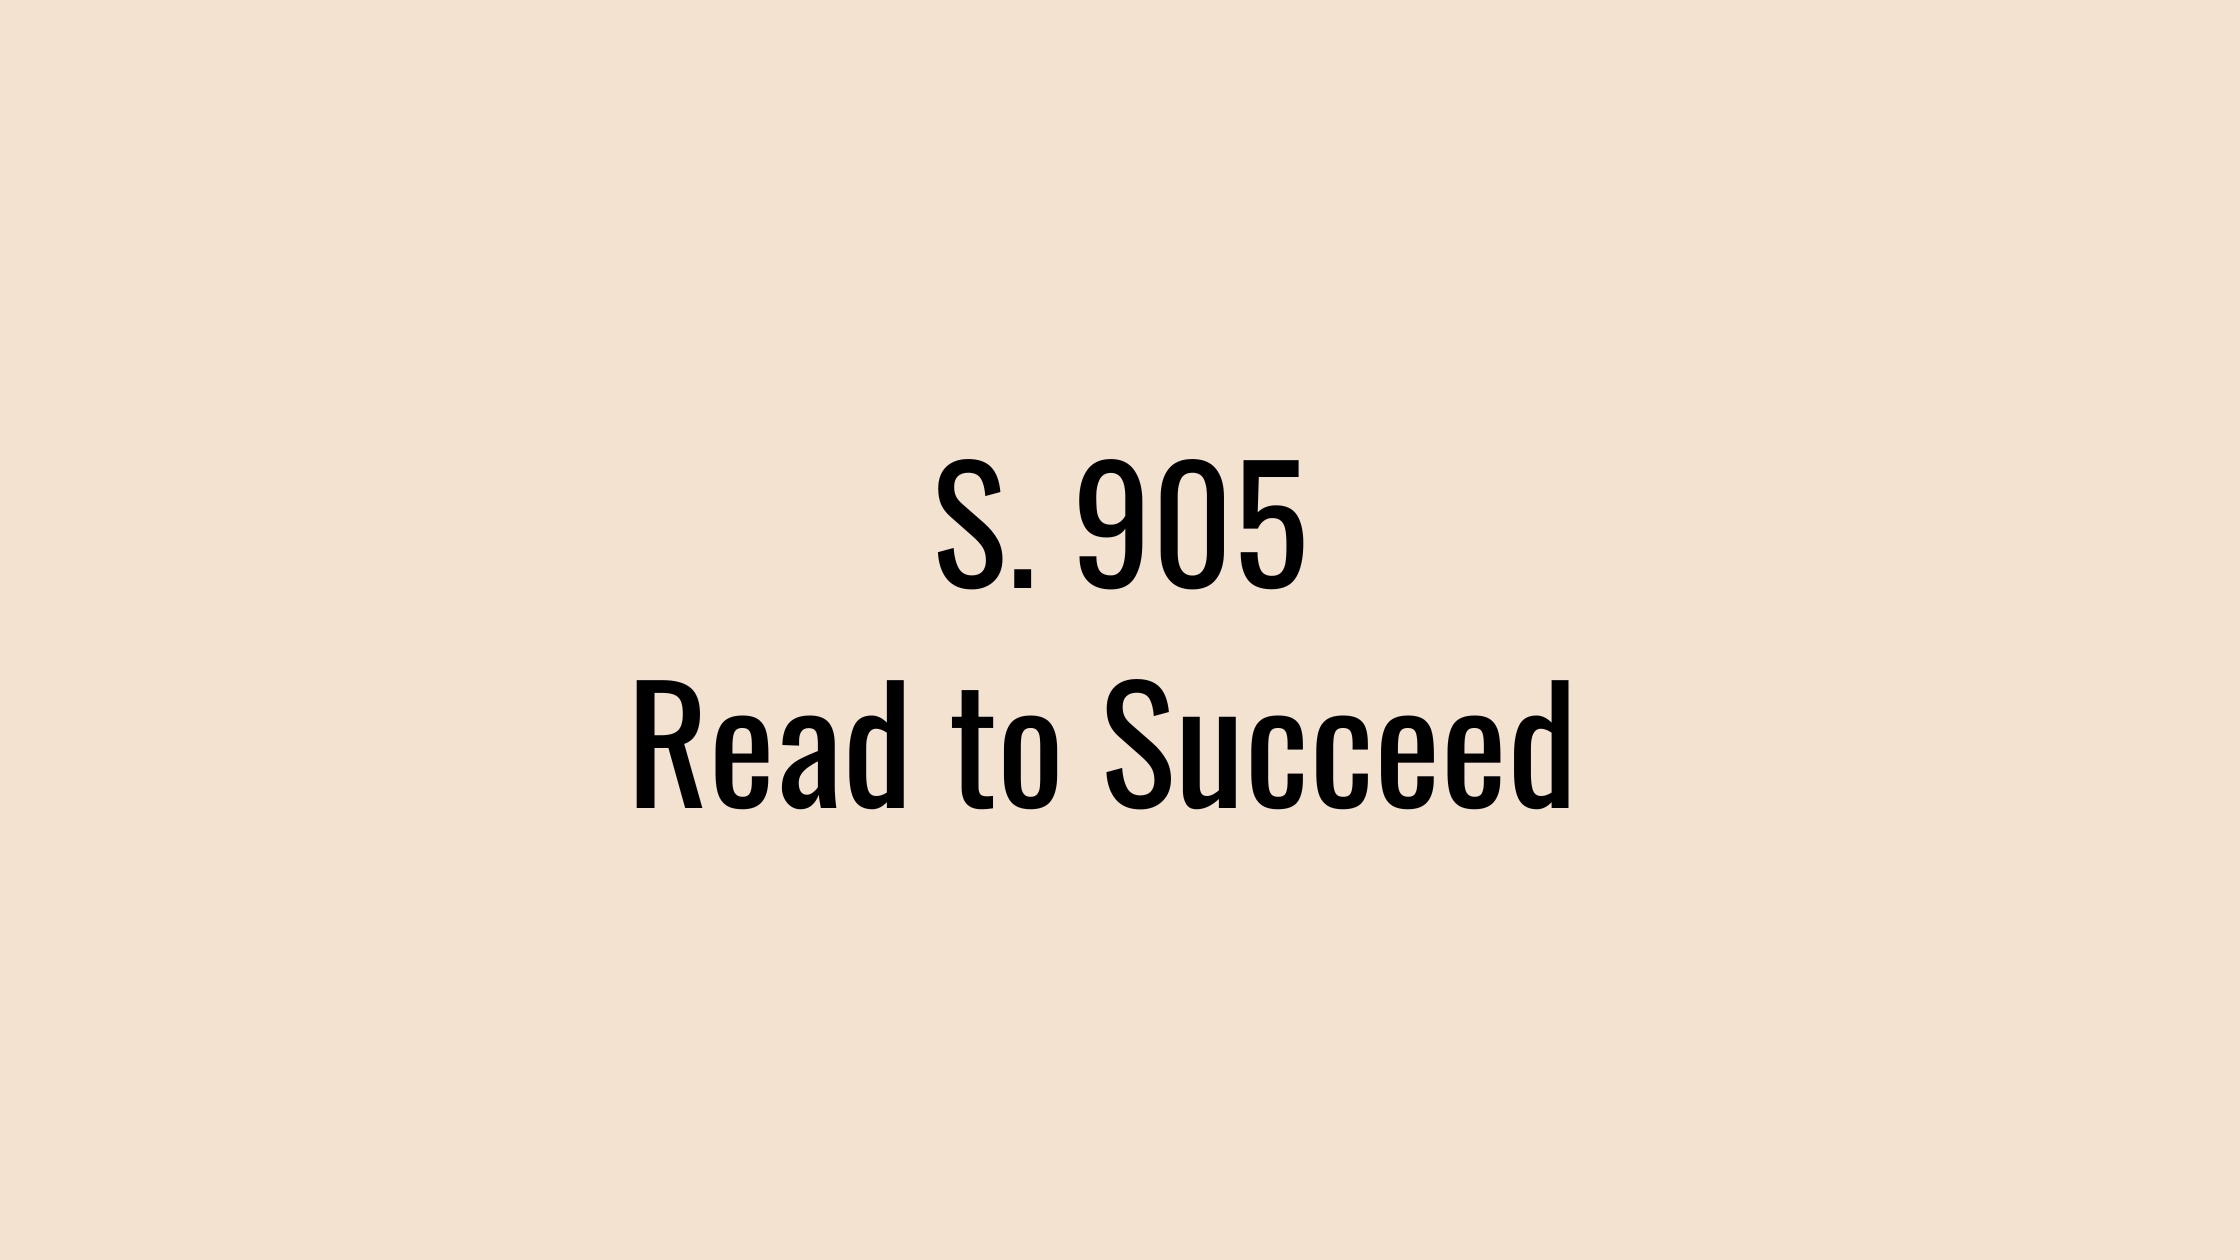 S. 905: Read to Succeed